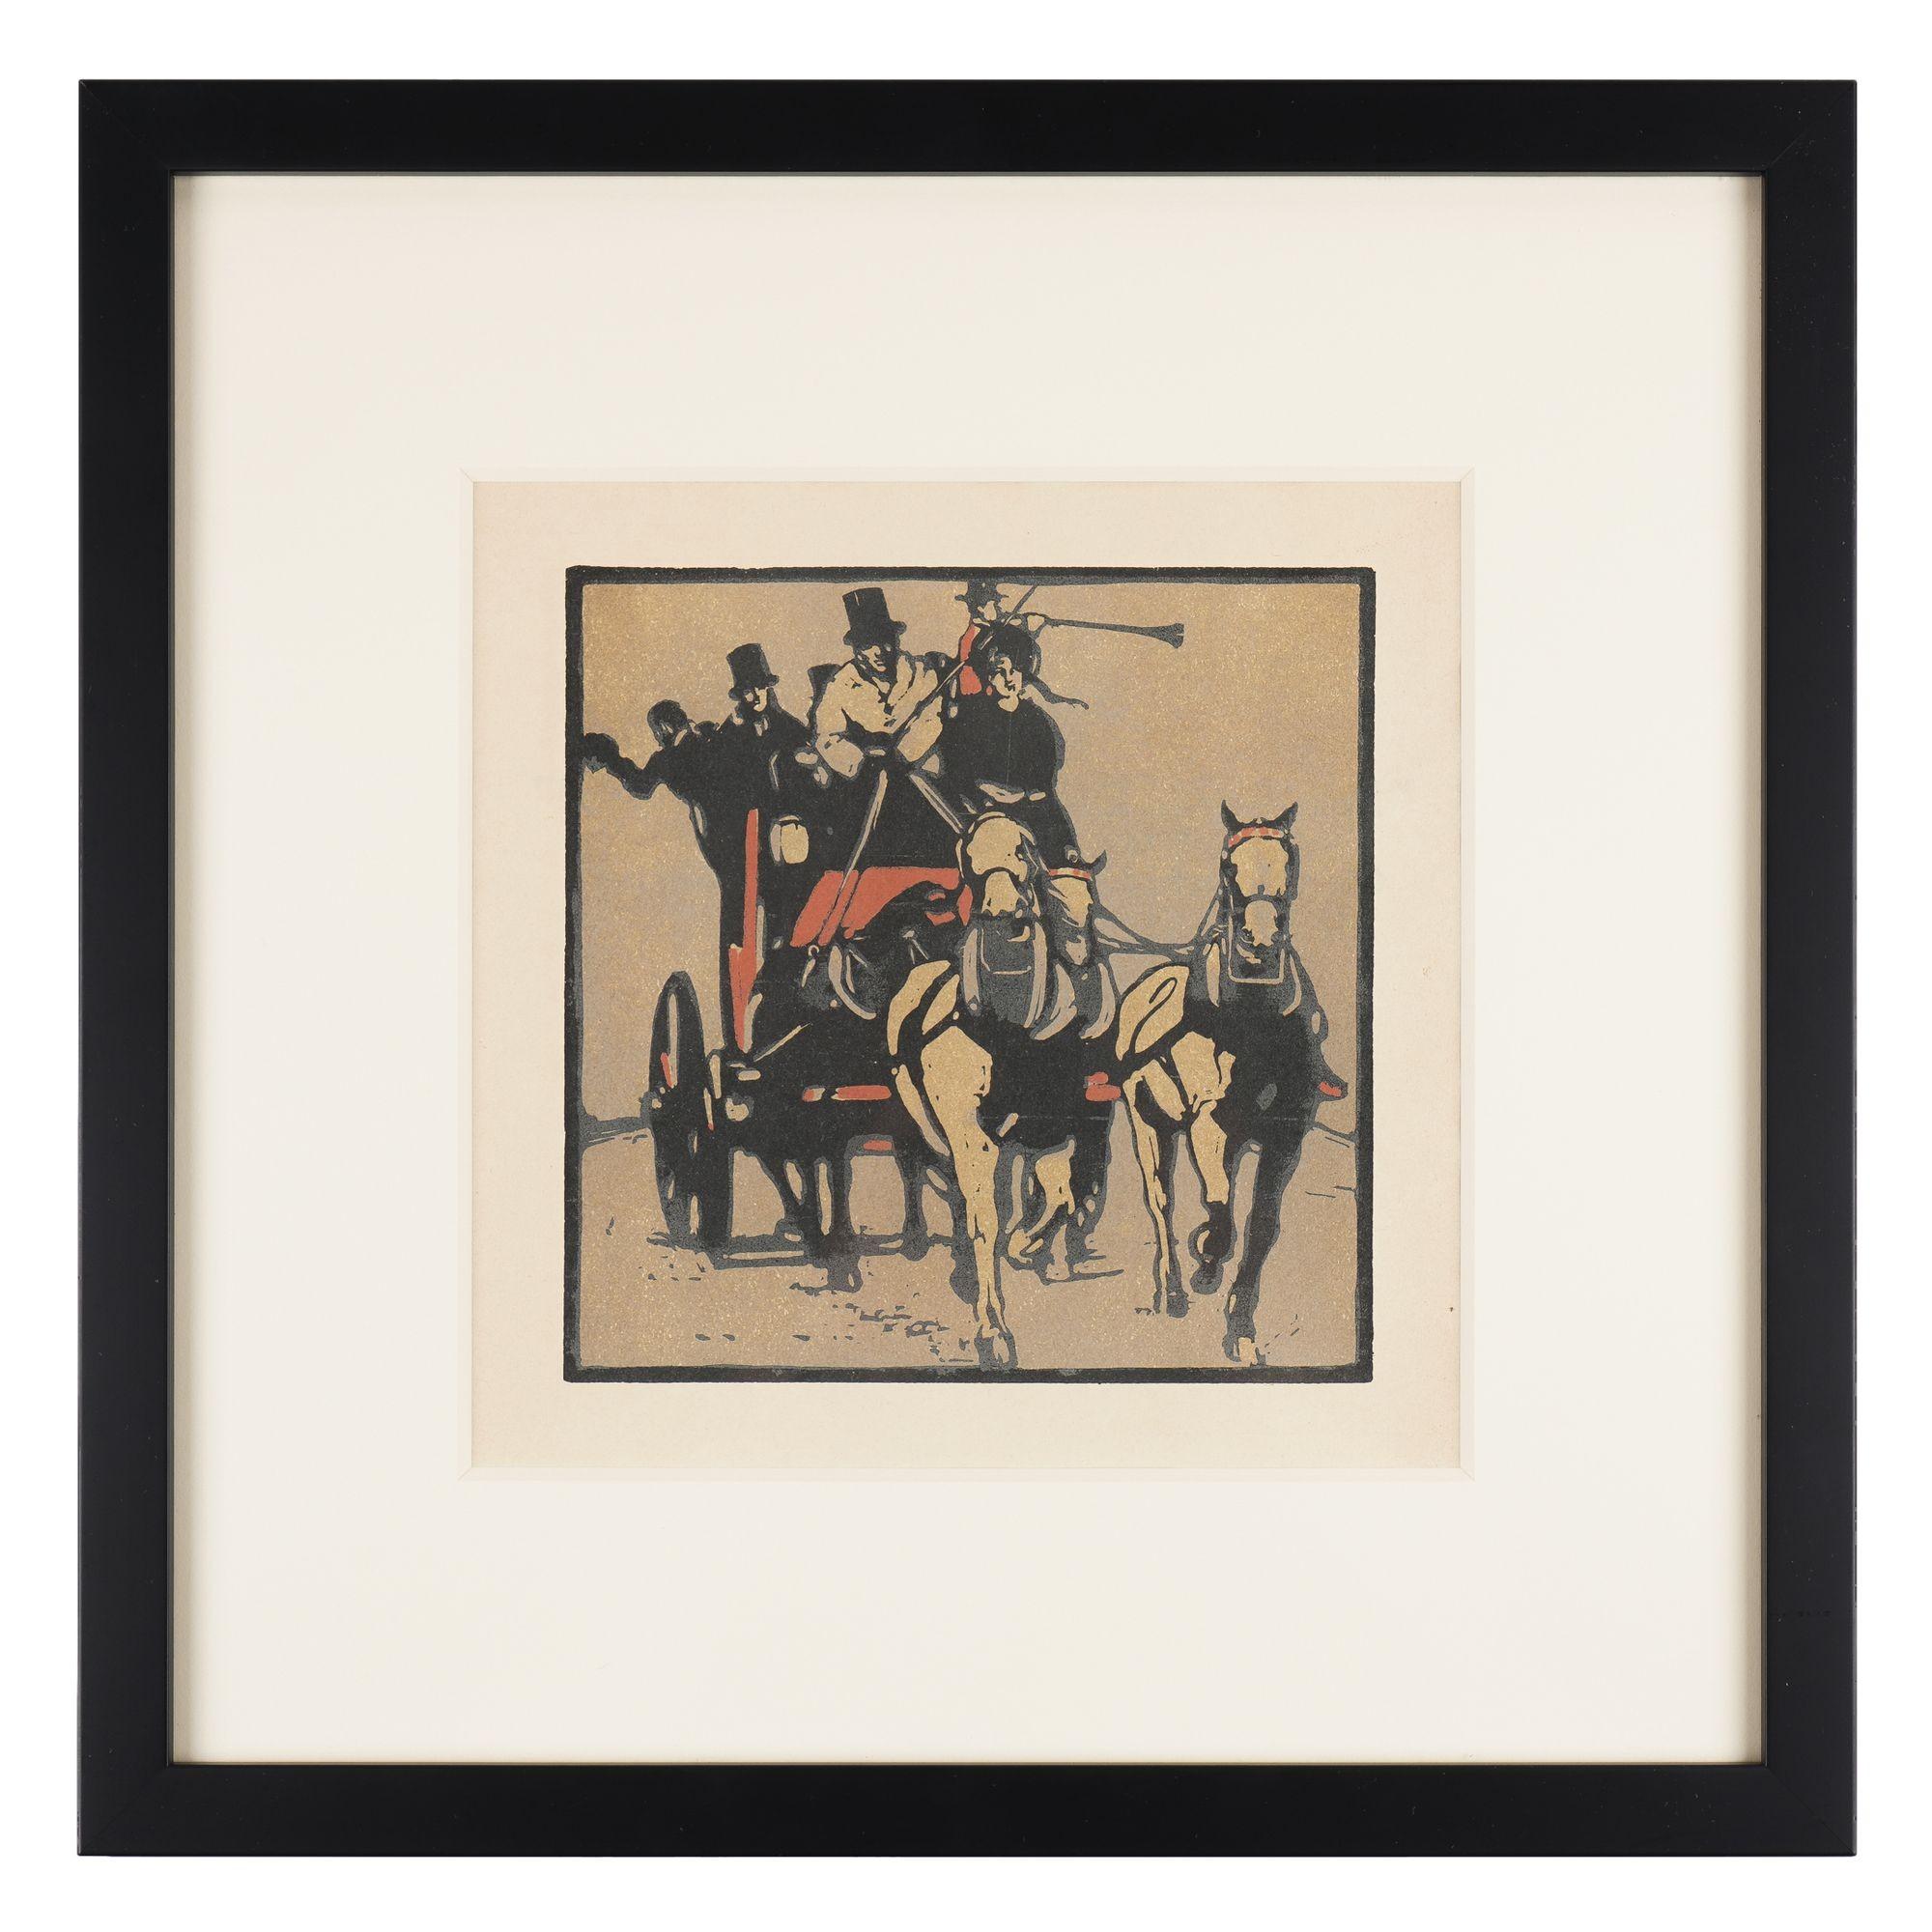 Set of four original woodblock prints from “An Almanac of Twelve Sports” by William Nicholson. Included in the set are the works of January, May, July, and August. All works are archival mat and mount under UV filtering glass and framed in a square